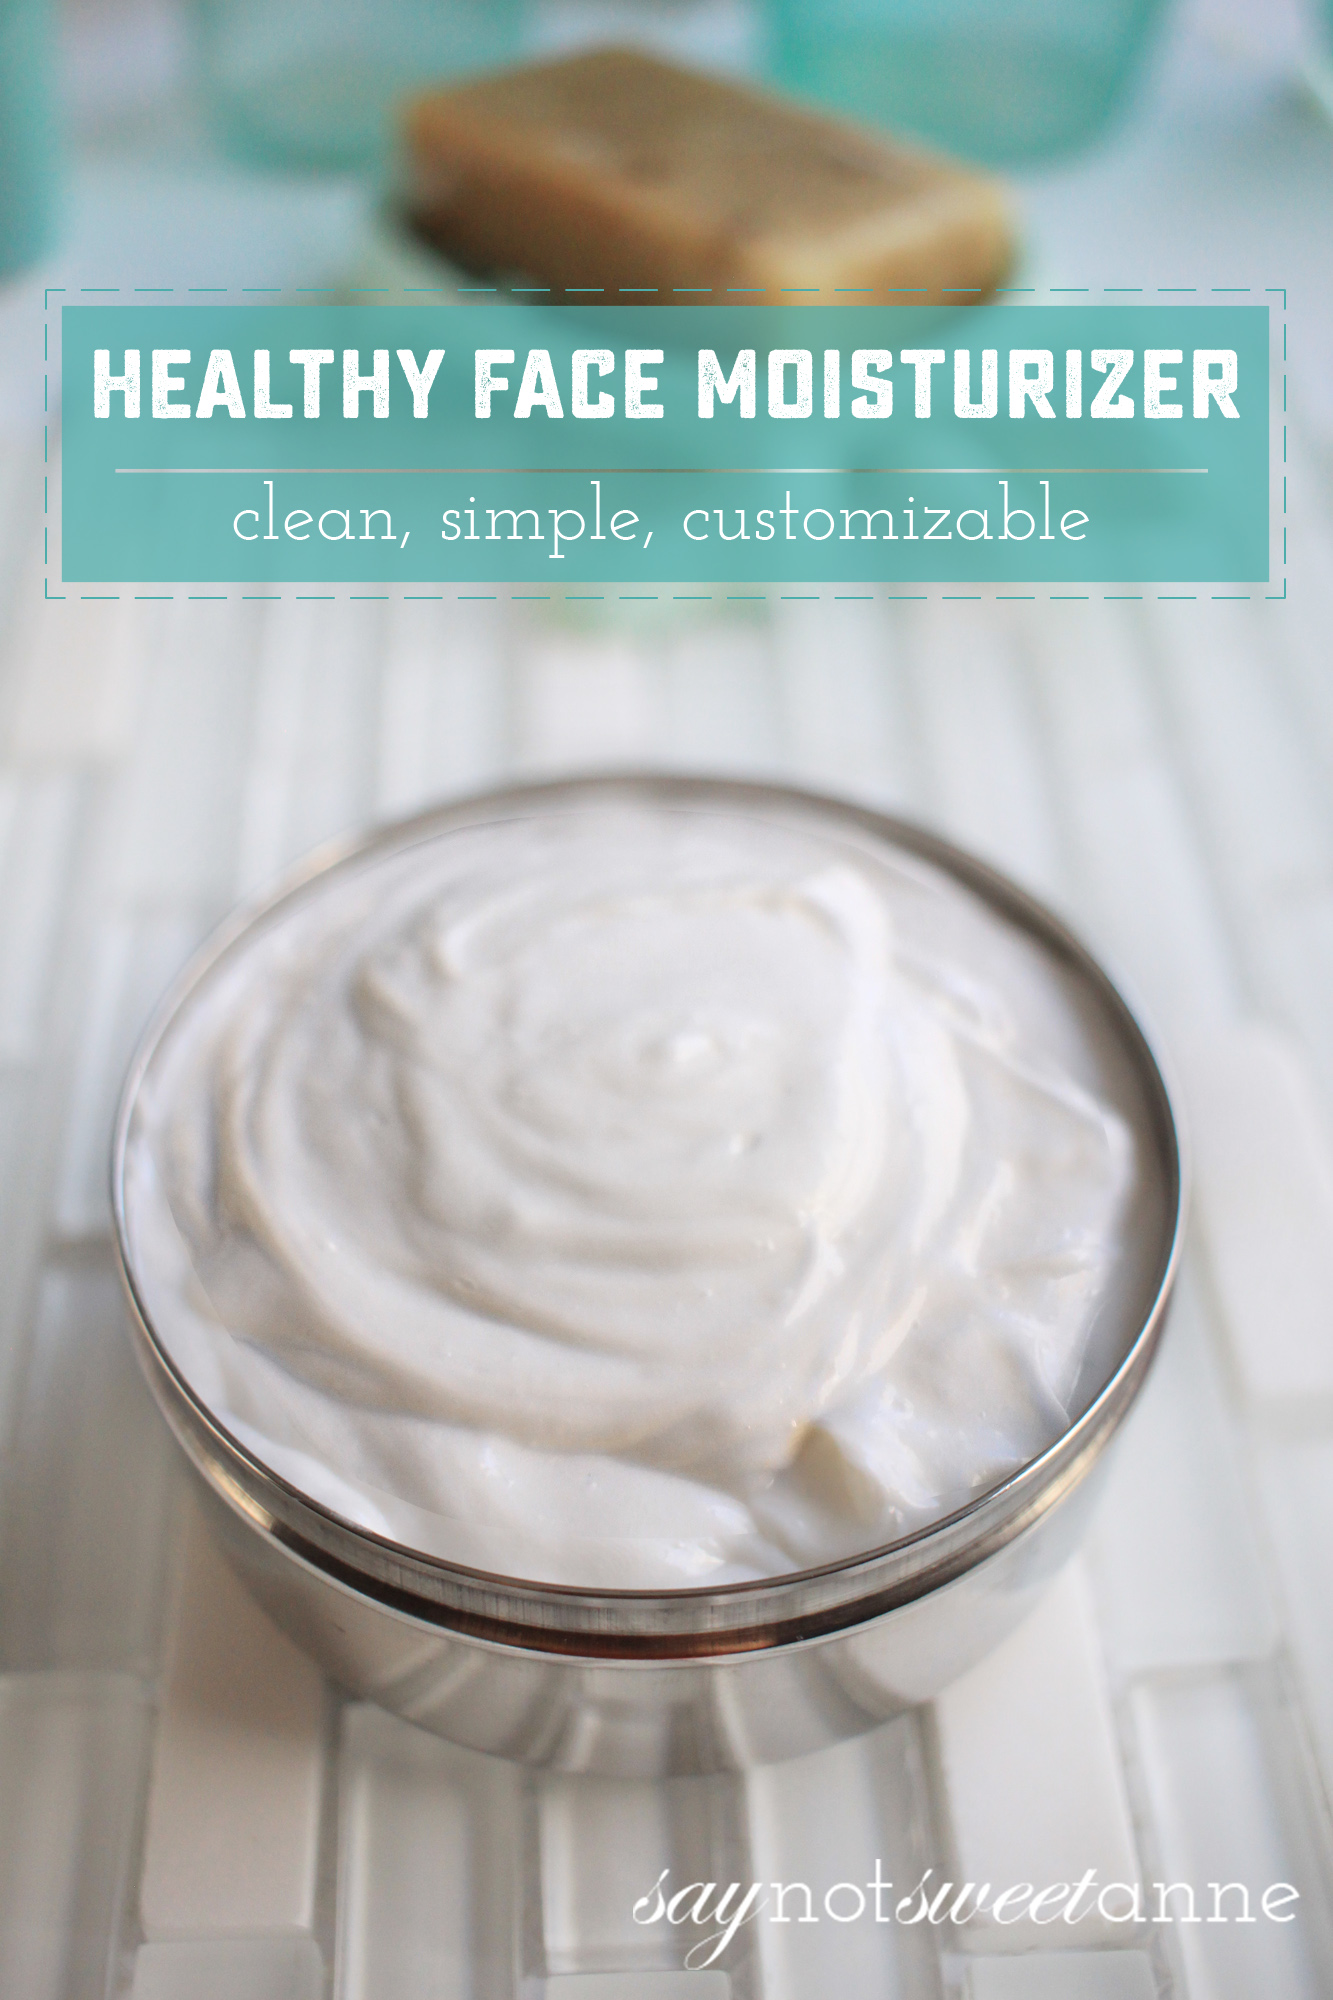 Home made all natural face moisturizer recipe. Simple and easy to find ingredients to make a customizable cream formula. Add essential oils, minerals, anything you’d like! Great for most skin types and easy enough for beginners. | saynotsweetanne.com